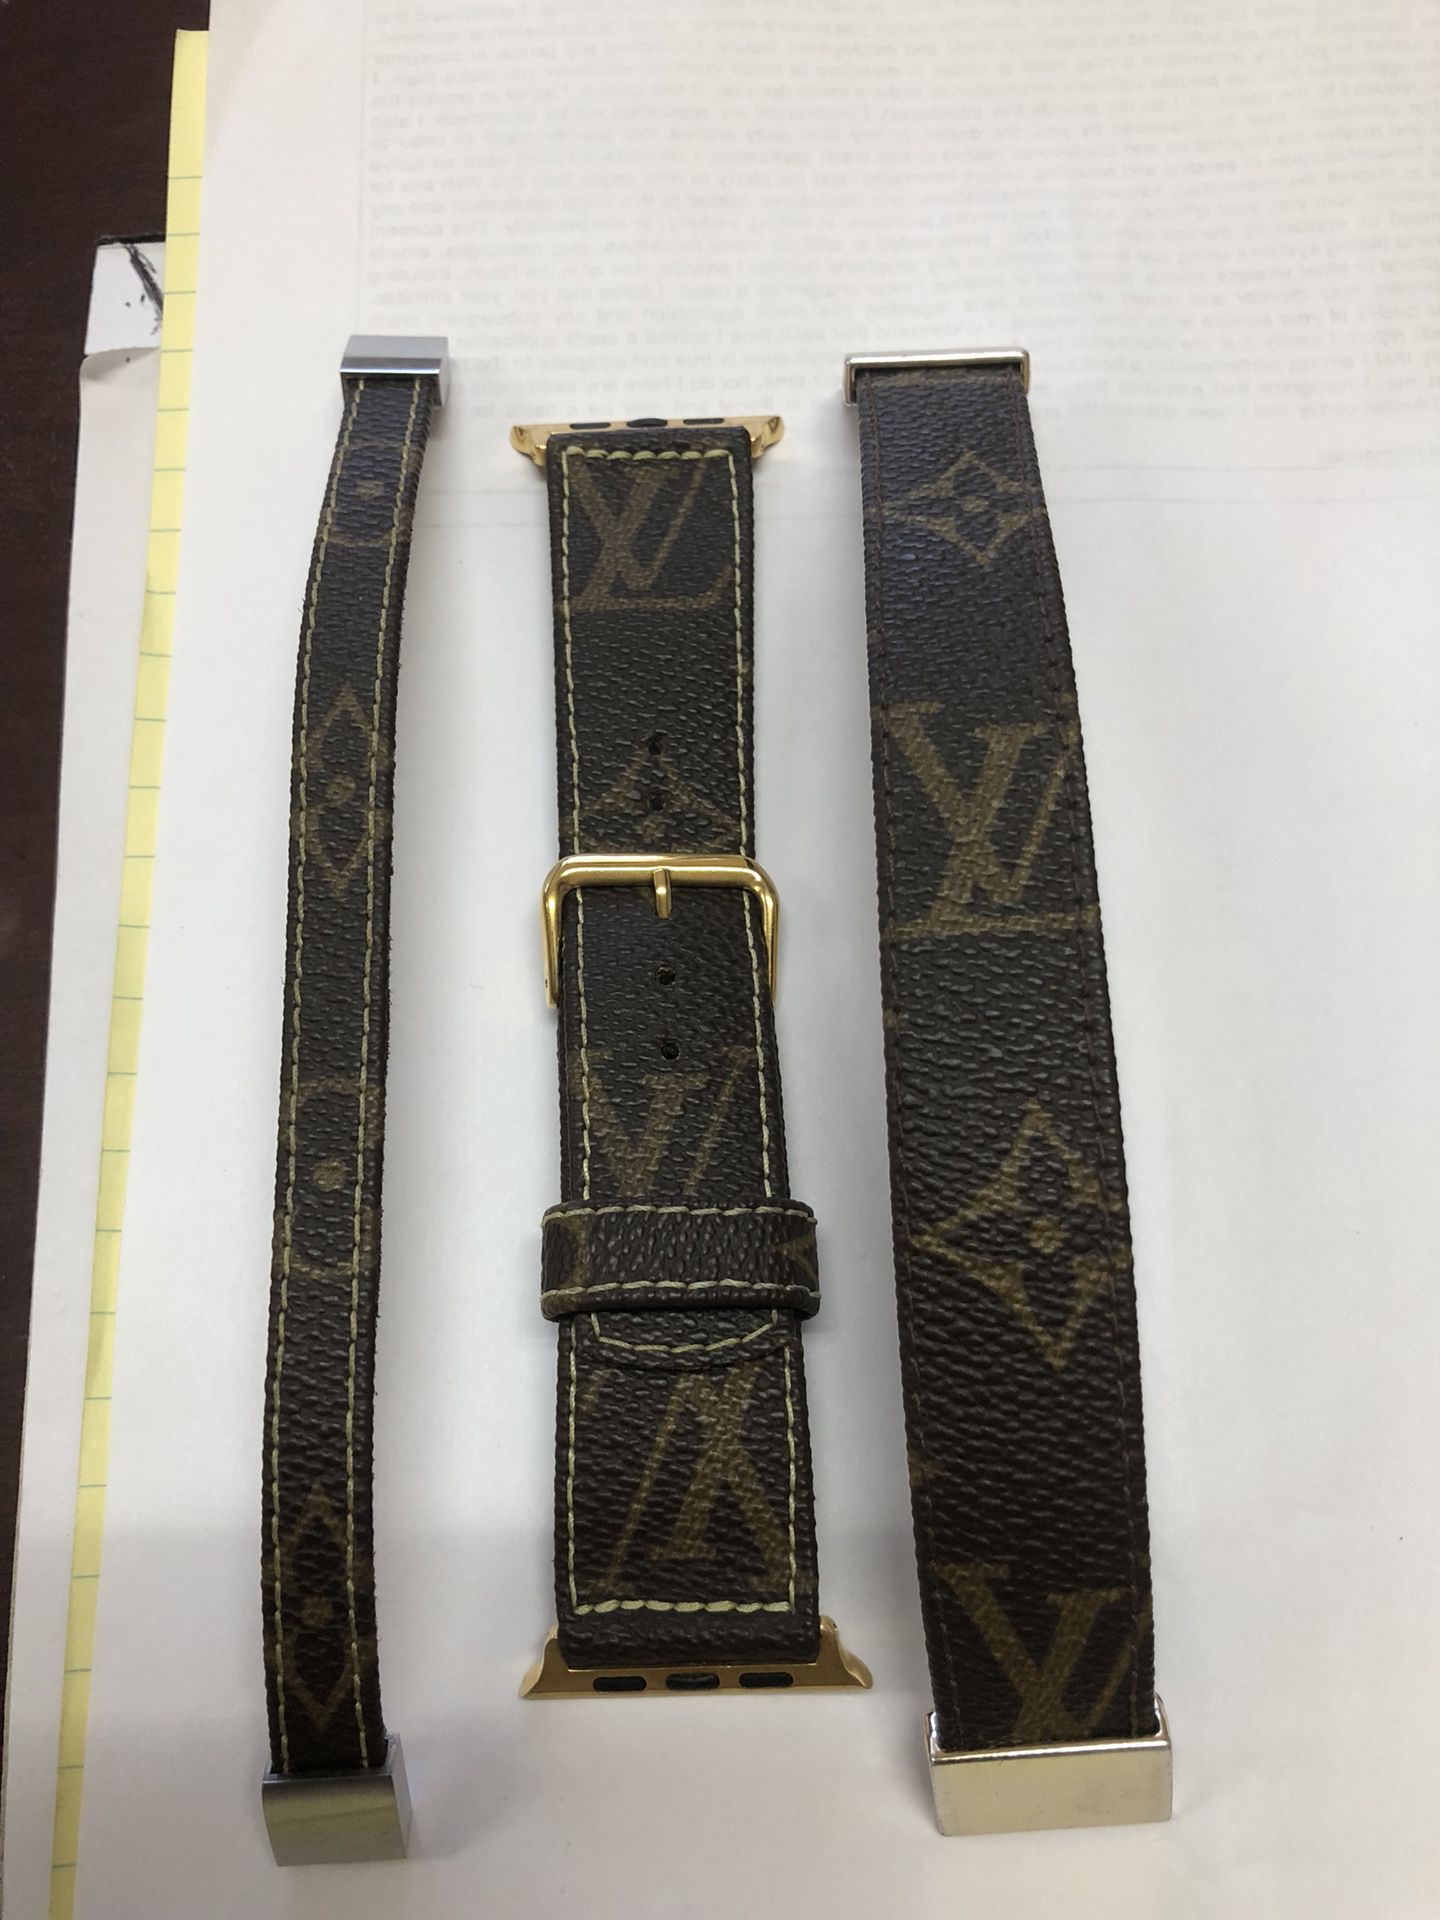 Custom Louis Vuitton Apple Watch band and bracelets for Sale in